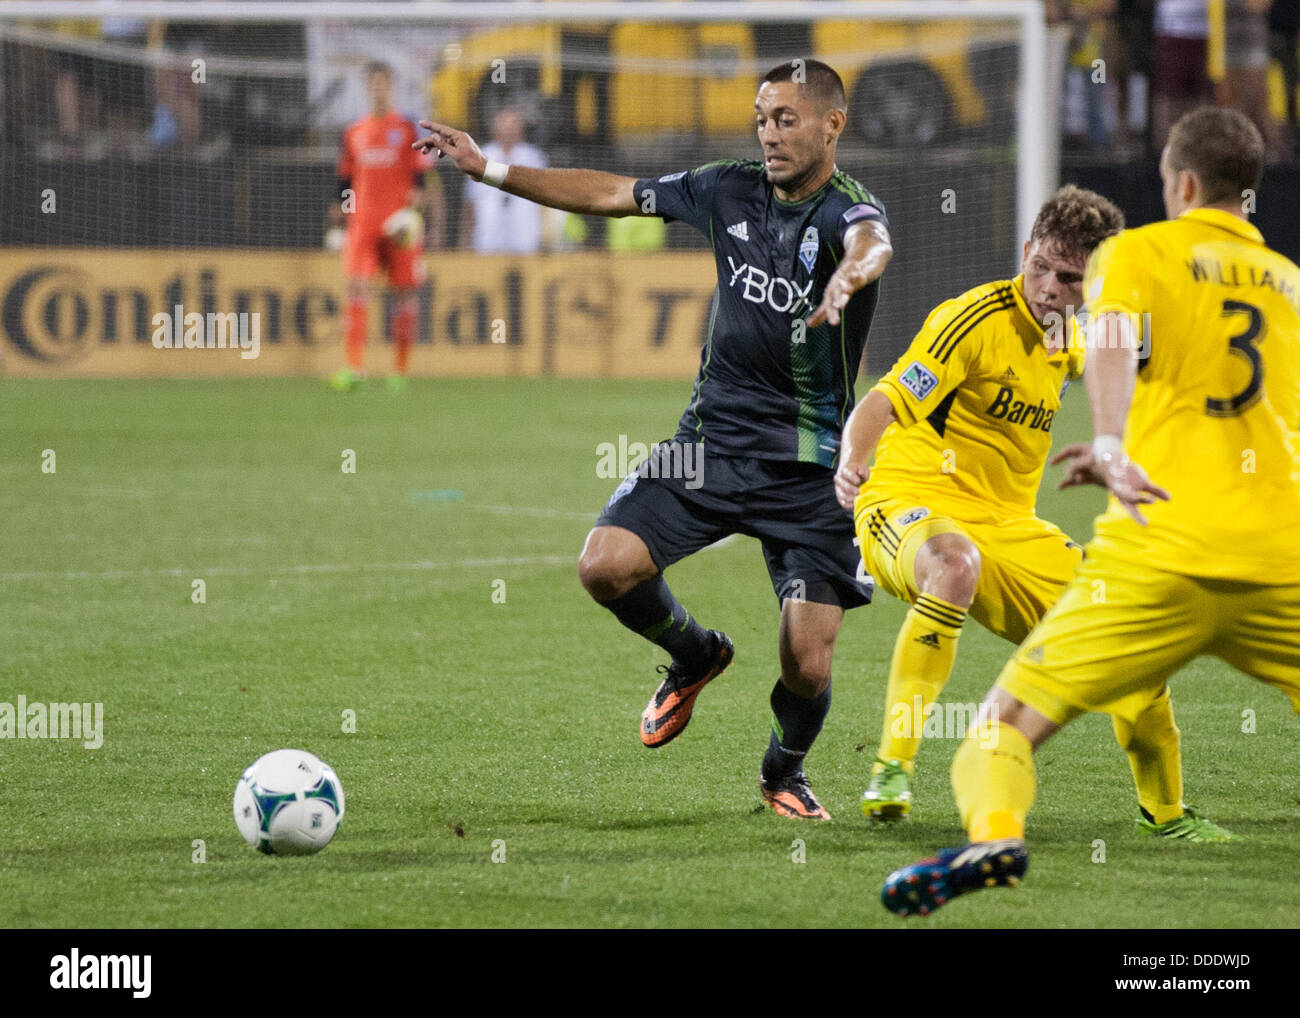 Aug. 31, 2013 - Columbus, Ohio, United States of America - August 31, 2013: Seattle Sounders FC forward Clint Dempsey (2) attempts a play during the Major League Soccer match between the Seattle Sounders FC and the Columbus Crew at Columbus Crew Stadium in Columbus, OH. Stock Photo